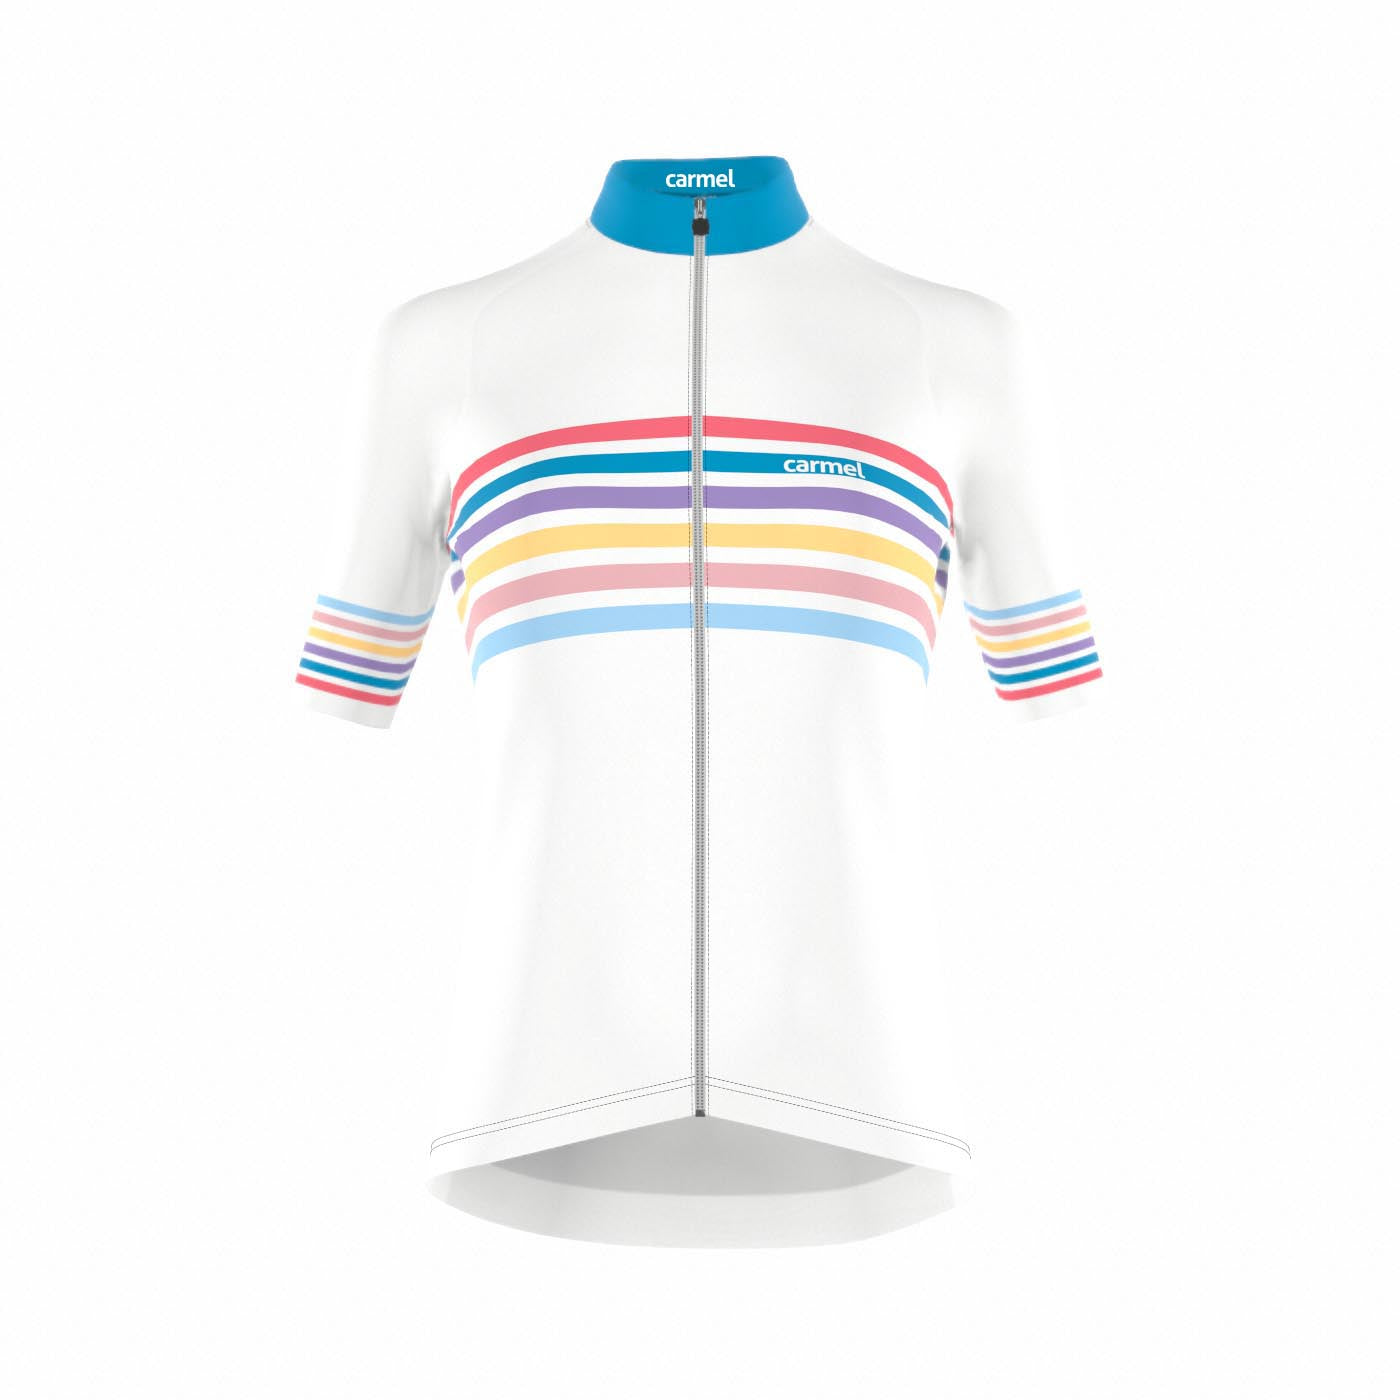 Women’s FHHV Classic Jersey